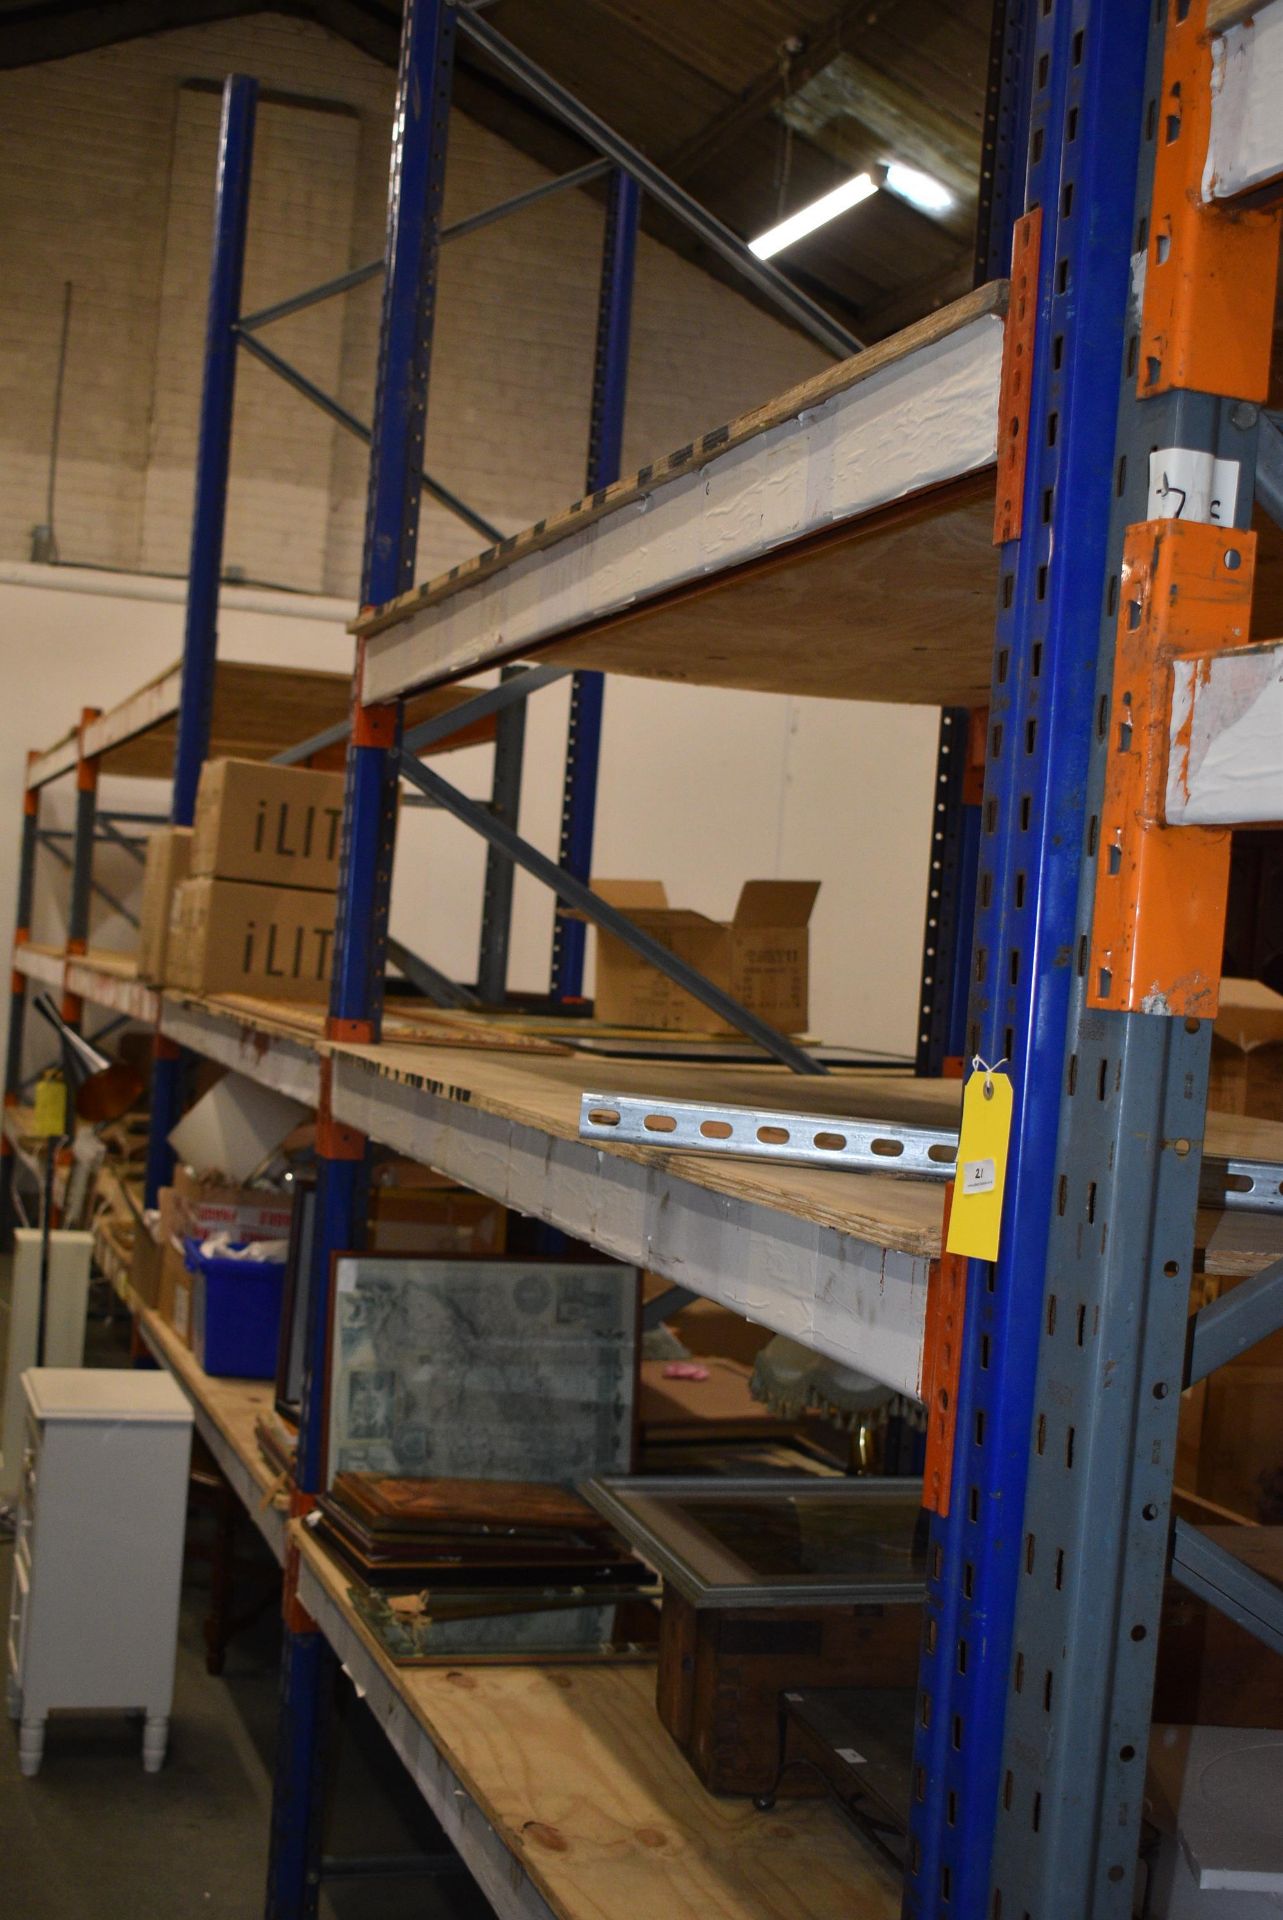 Two Bays of Dexion M Pallet Racking 110x230cm x 370cm high Comprising Three Uprights and Ten Beams